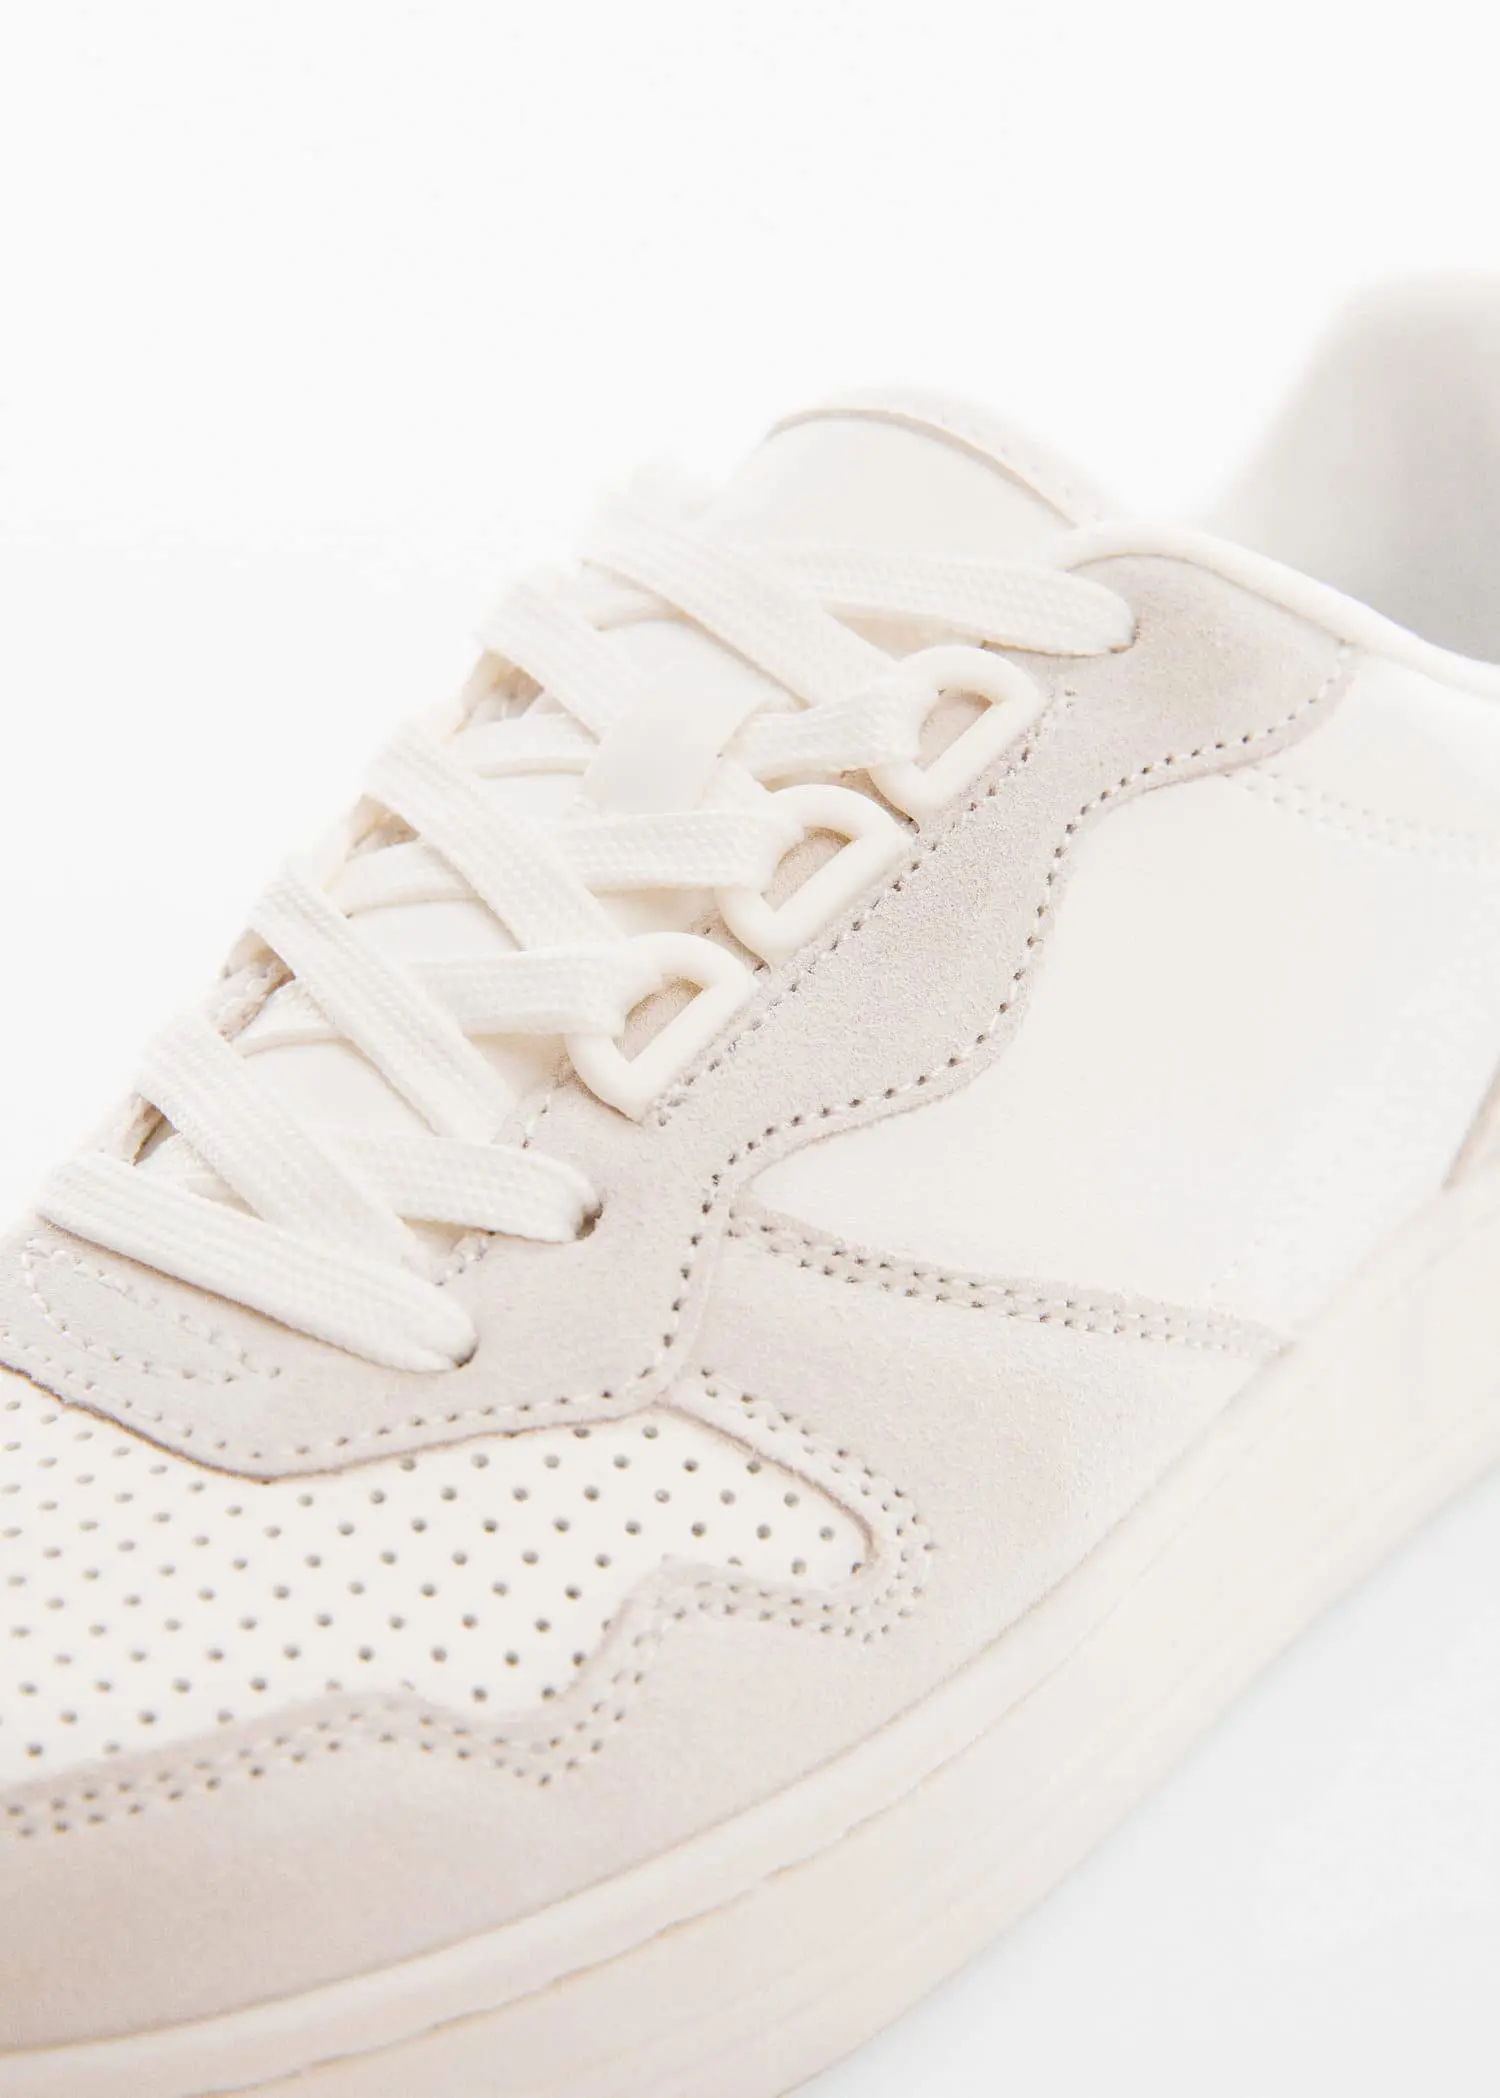 Mango Panels leather sneakers. a close-up view of a pair of white sneakers. 